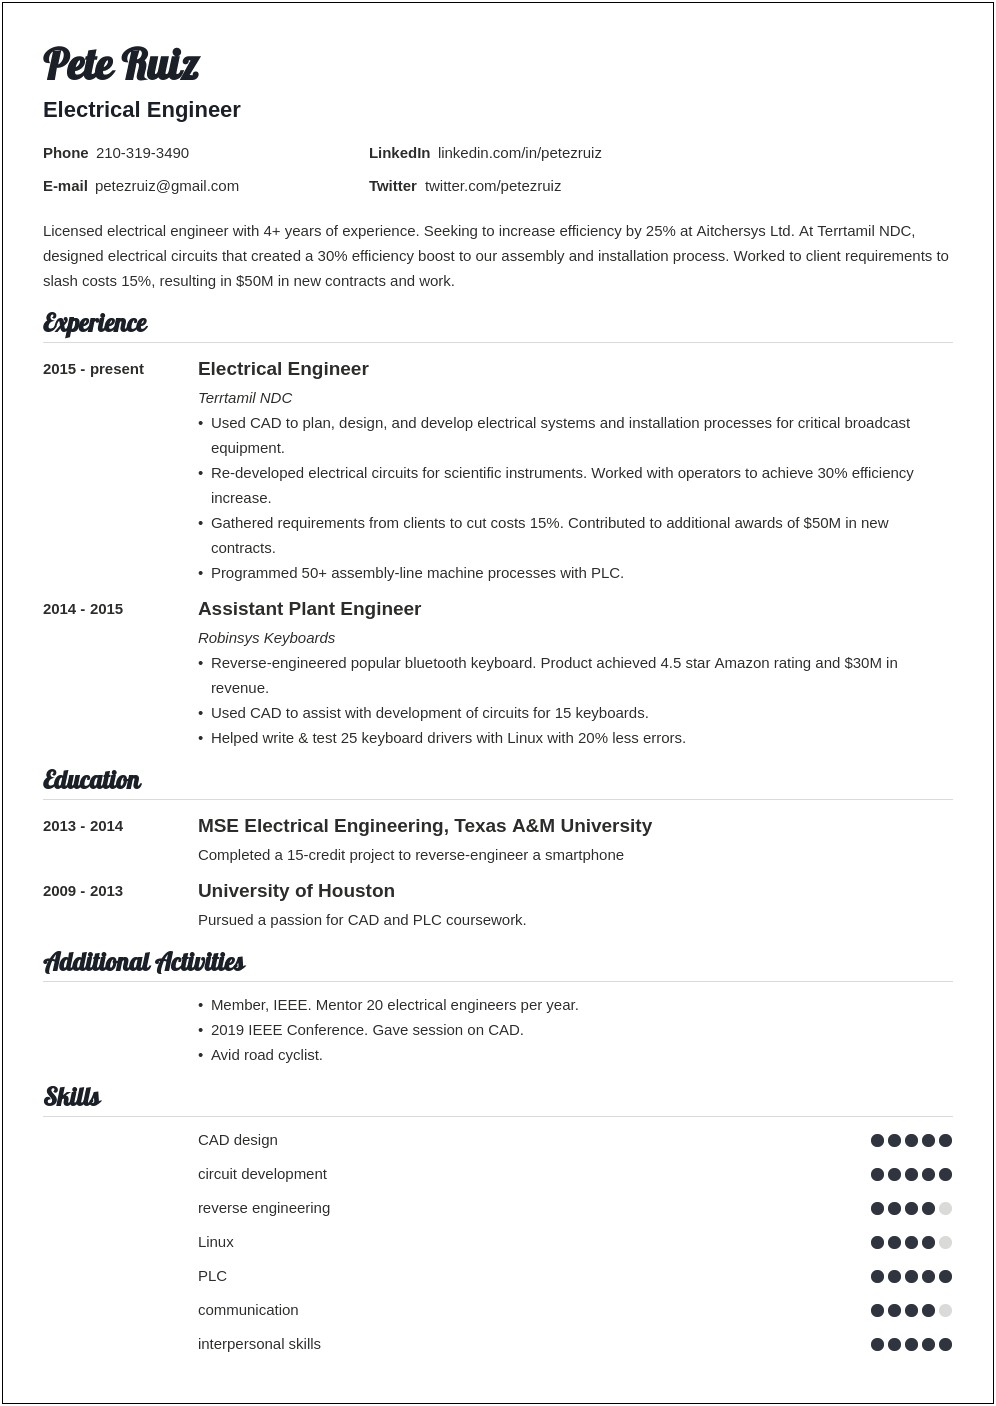 Sample Resume For Entry Level Electrical Engineer